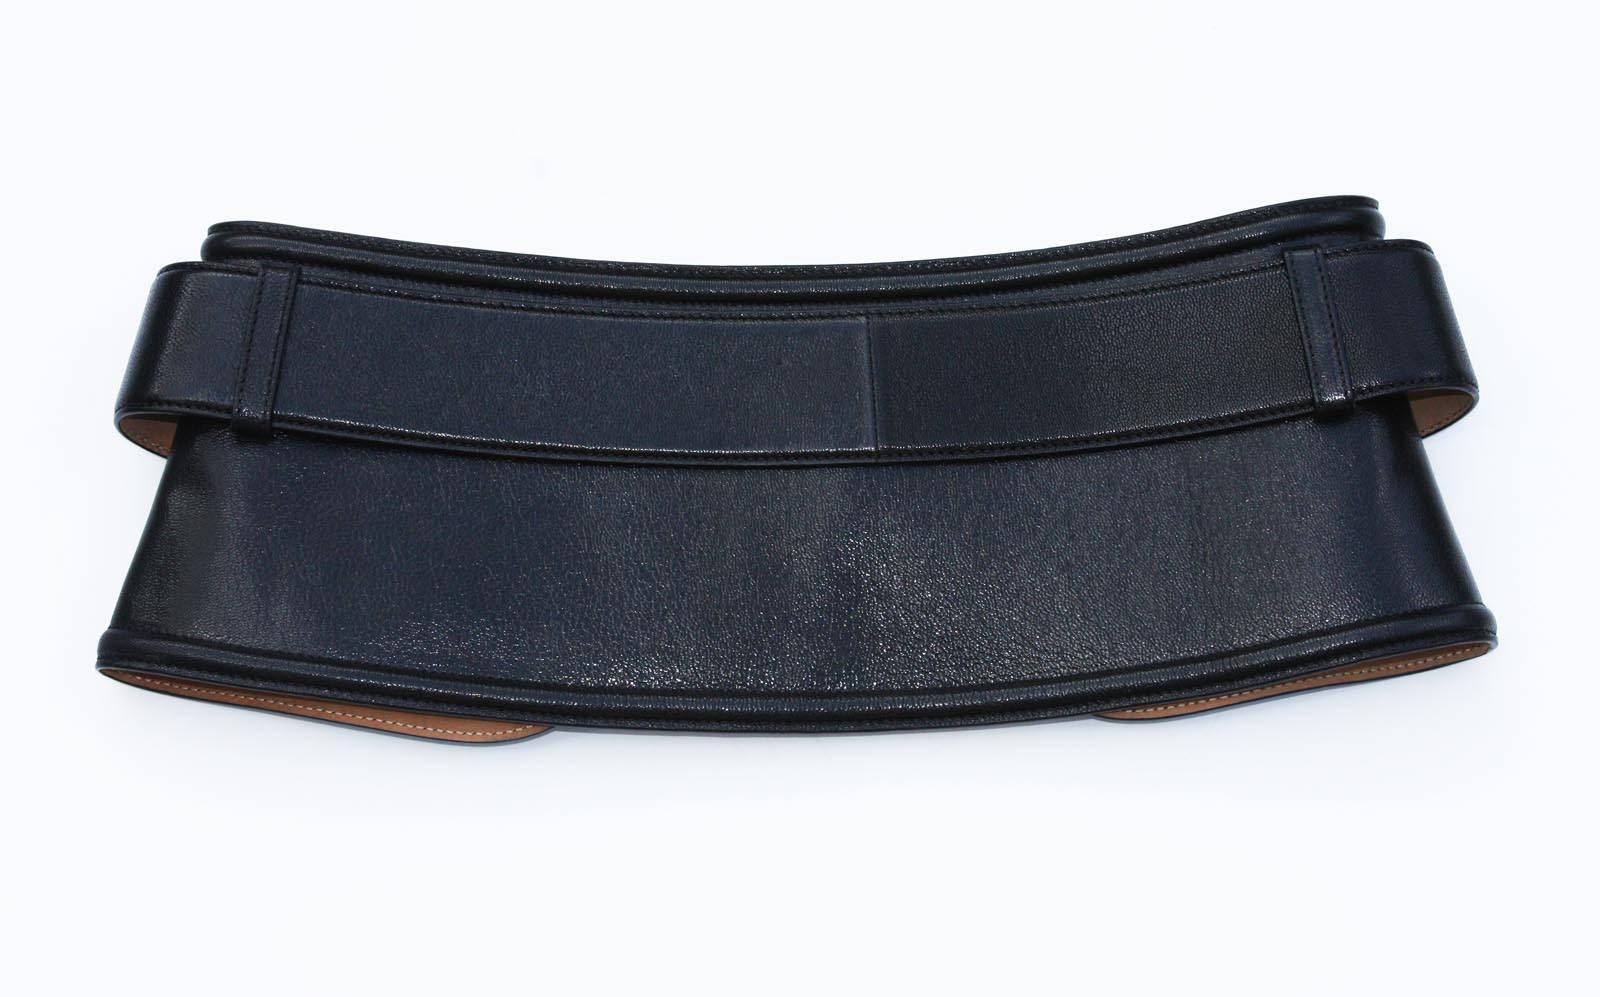 New Tom Ford Peplum Style Leather Black Belt
100% Genuine Leather
Gold-Tone Metal Hardware, Approx. 6 inches wide. This belt is removable and can be used just by itself.
Sizes available: 70/28, 75/30, 80/32, 85/34.
Made in Italy
Retail $1200.00
New